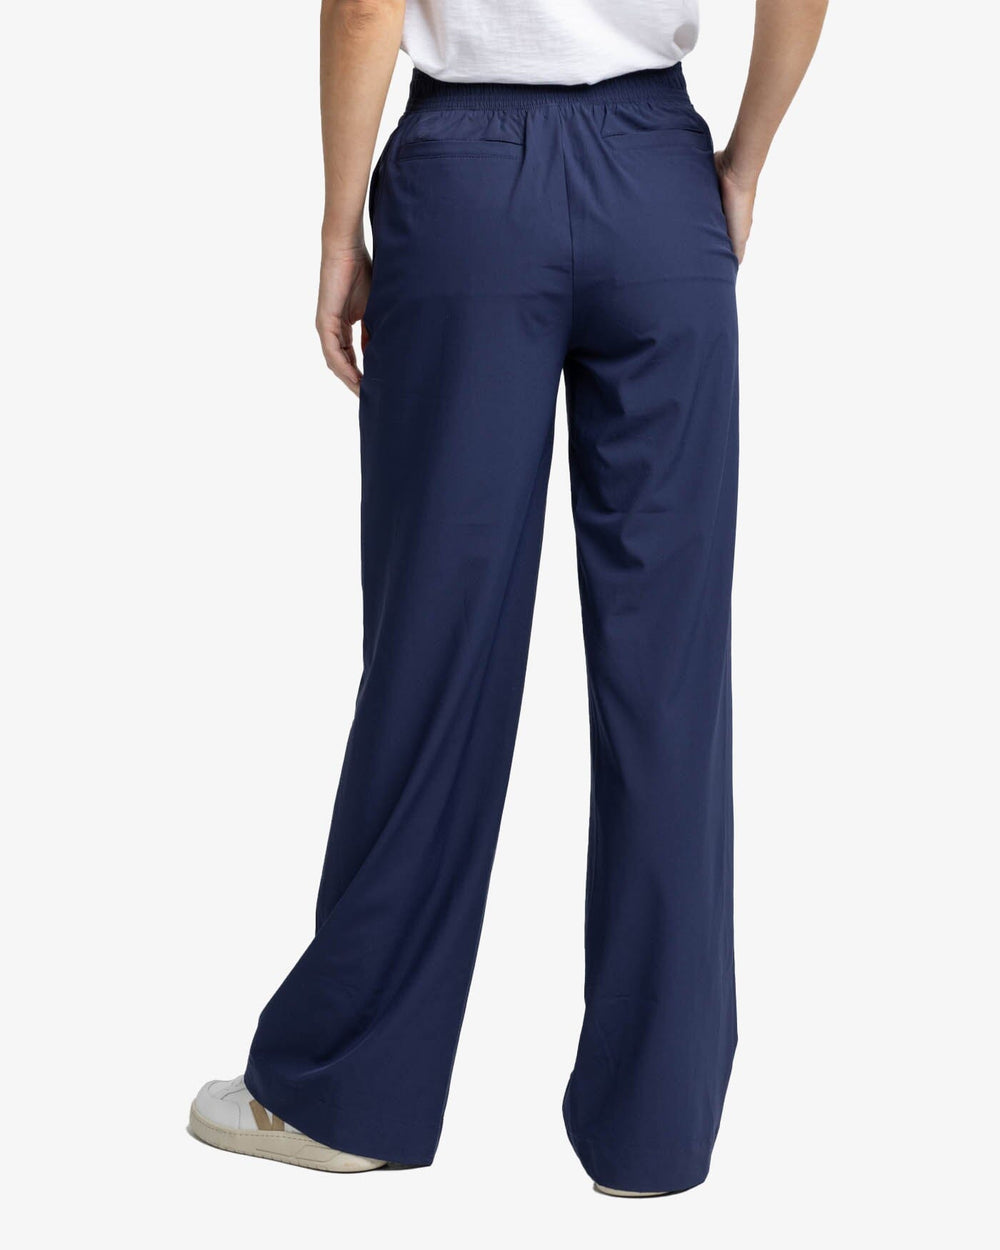 The back view of the Southern Tide Teegan Wide Leg Woven Pant by Southern Tide - Nautical Navy